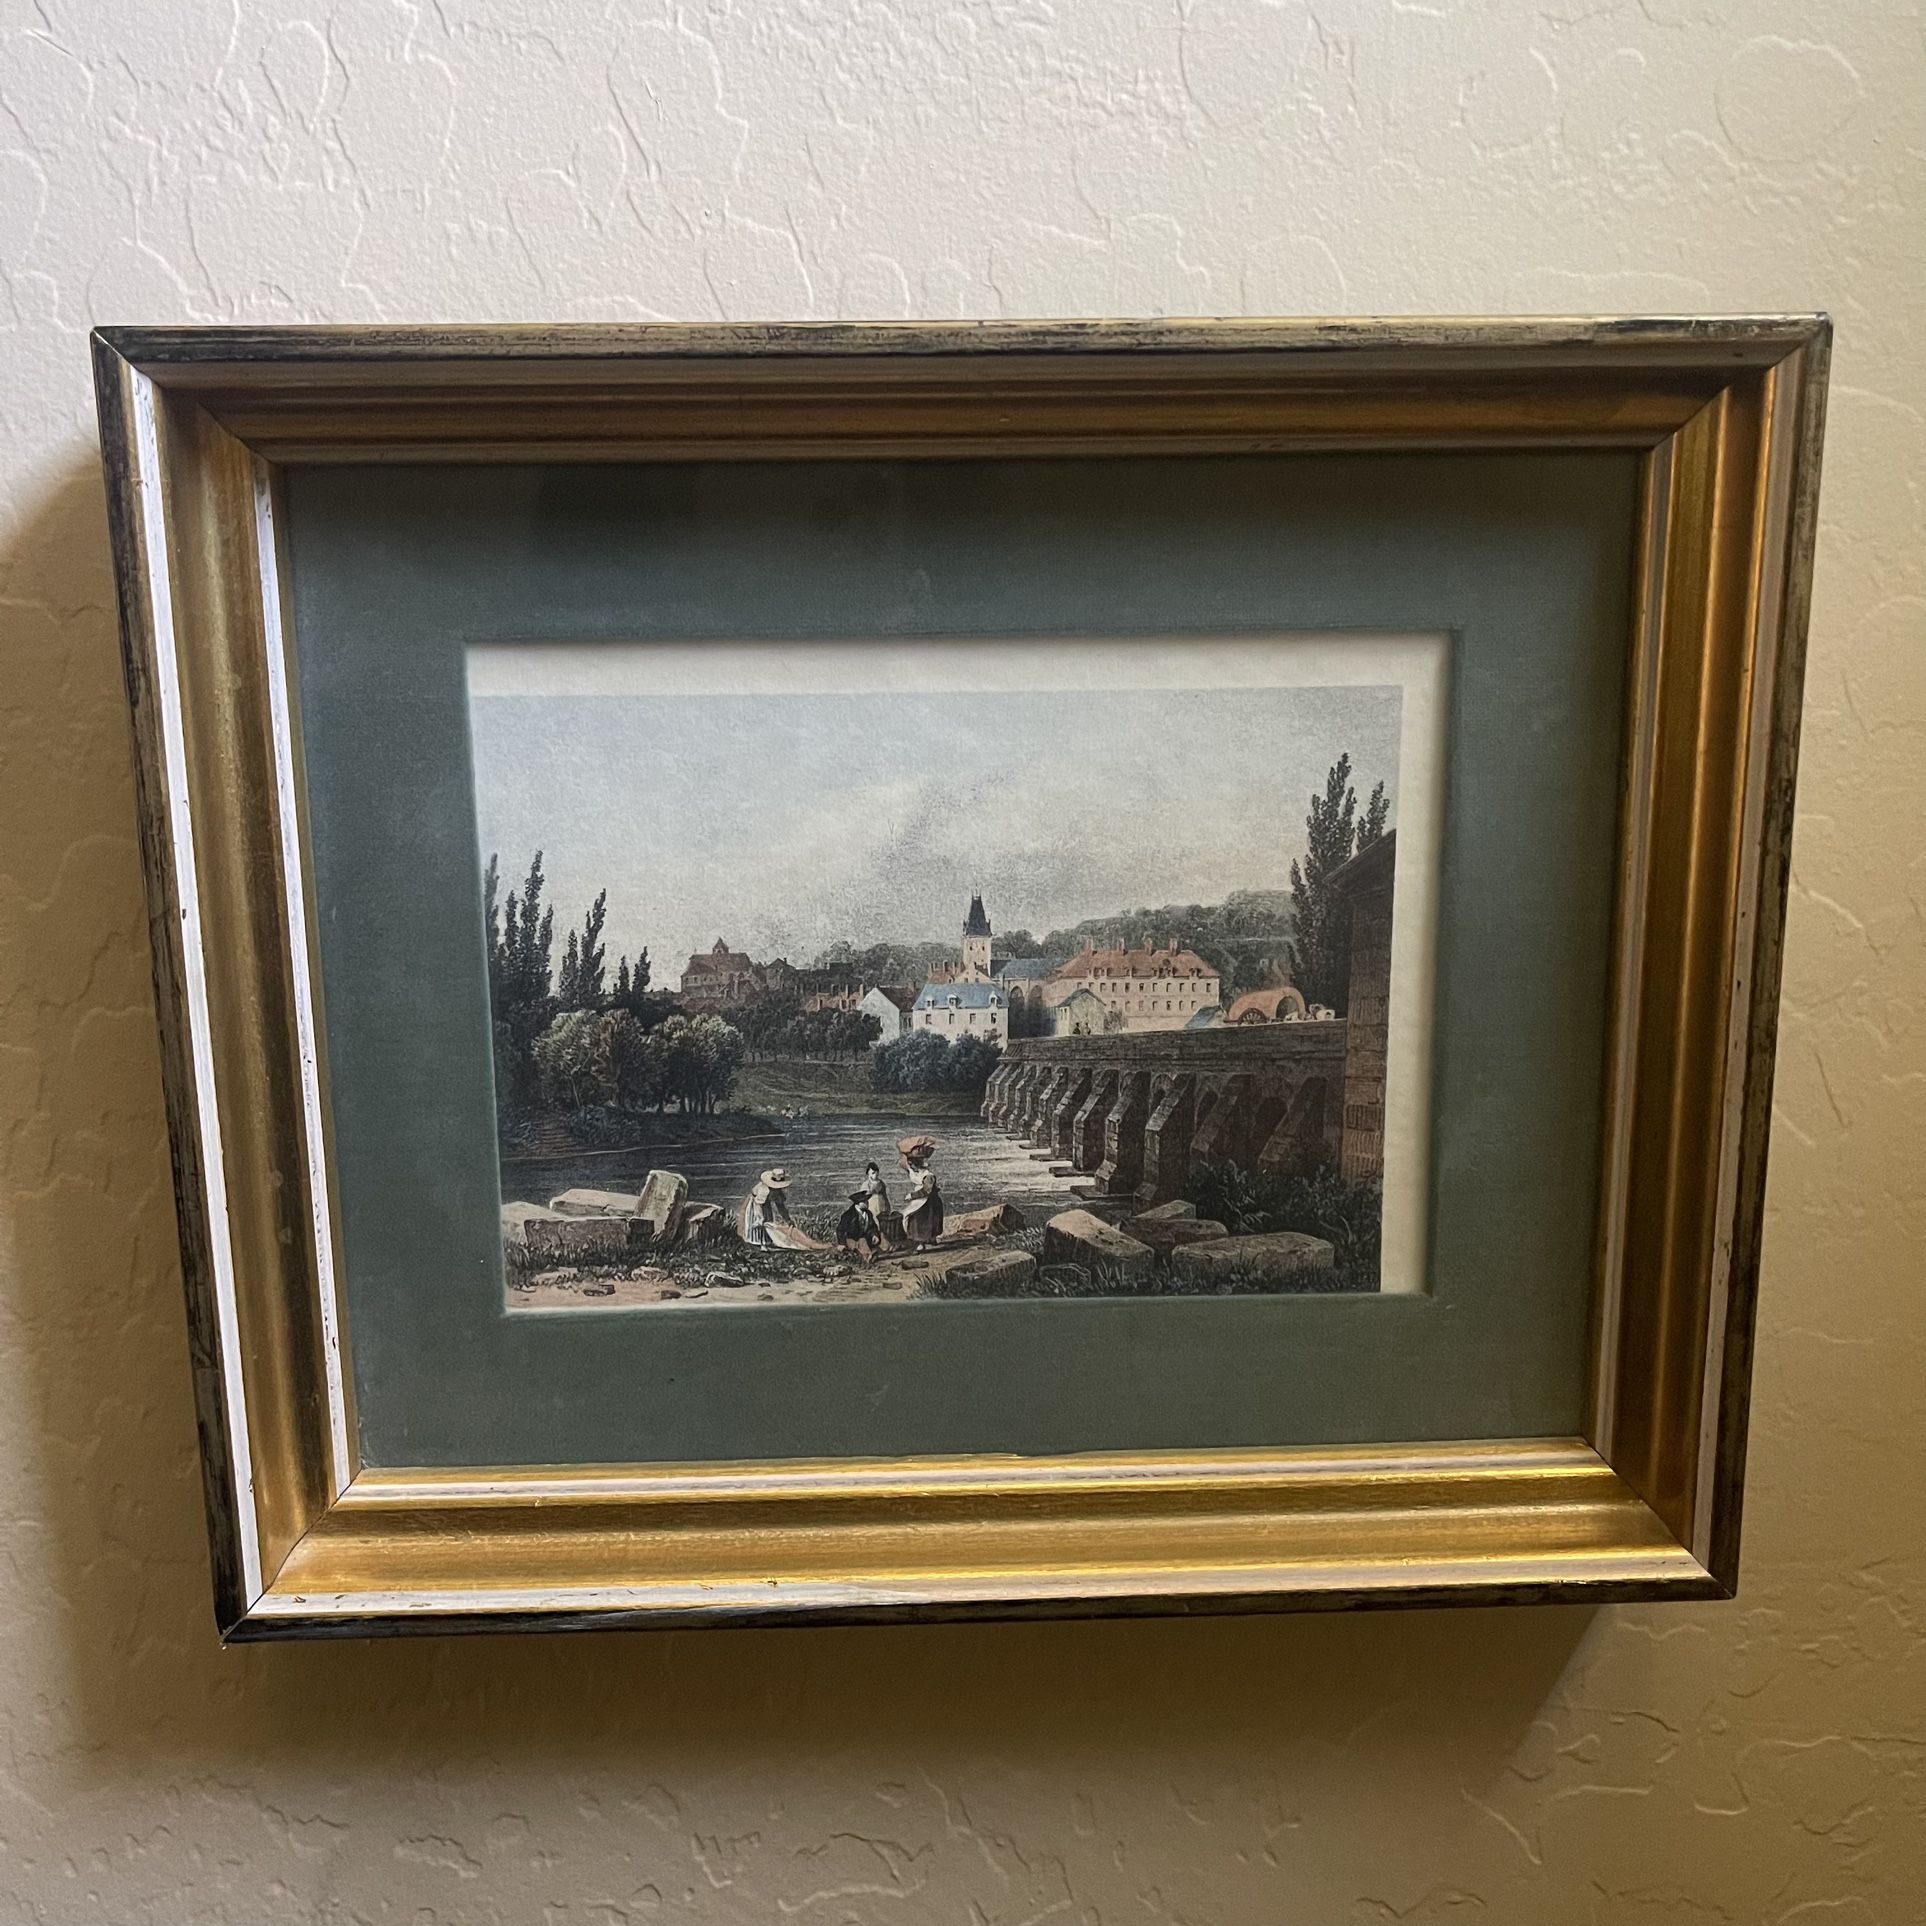 (2) VINTAGE - View of Luxembourg Colored Lithograph Frame/Matted Antique